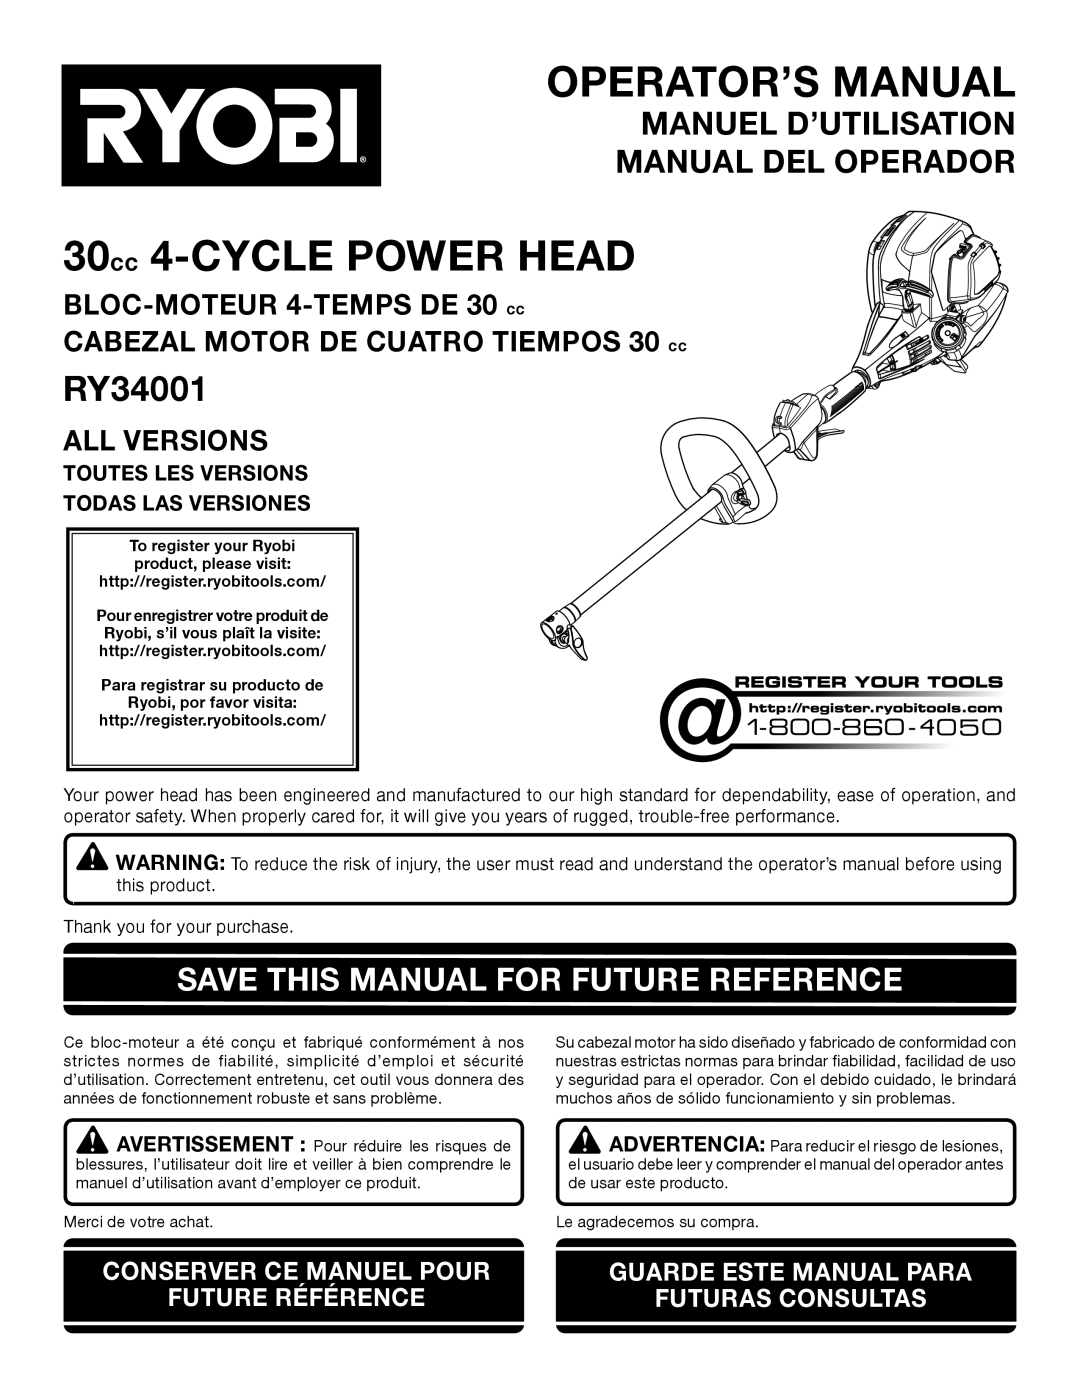 Ryobi RY34001 manuel dutilisation Save This Manual For Future Reference, All Versions, Operator’S Manual, Future Référence 